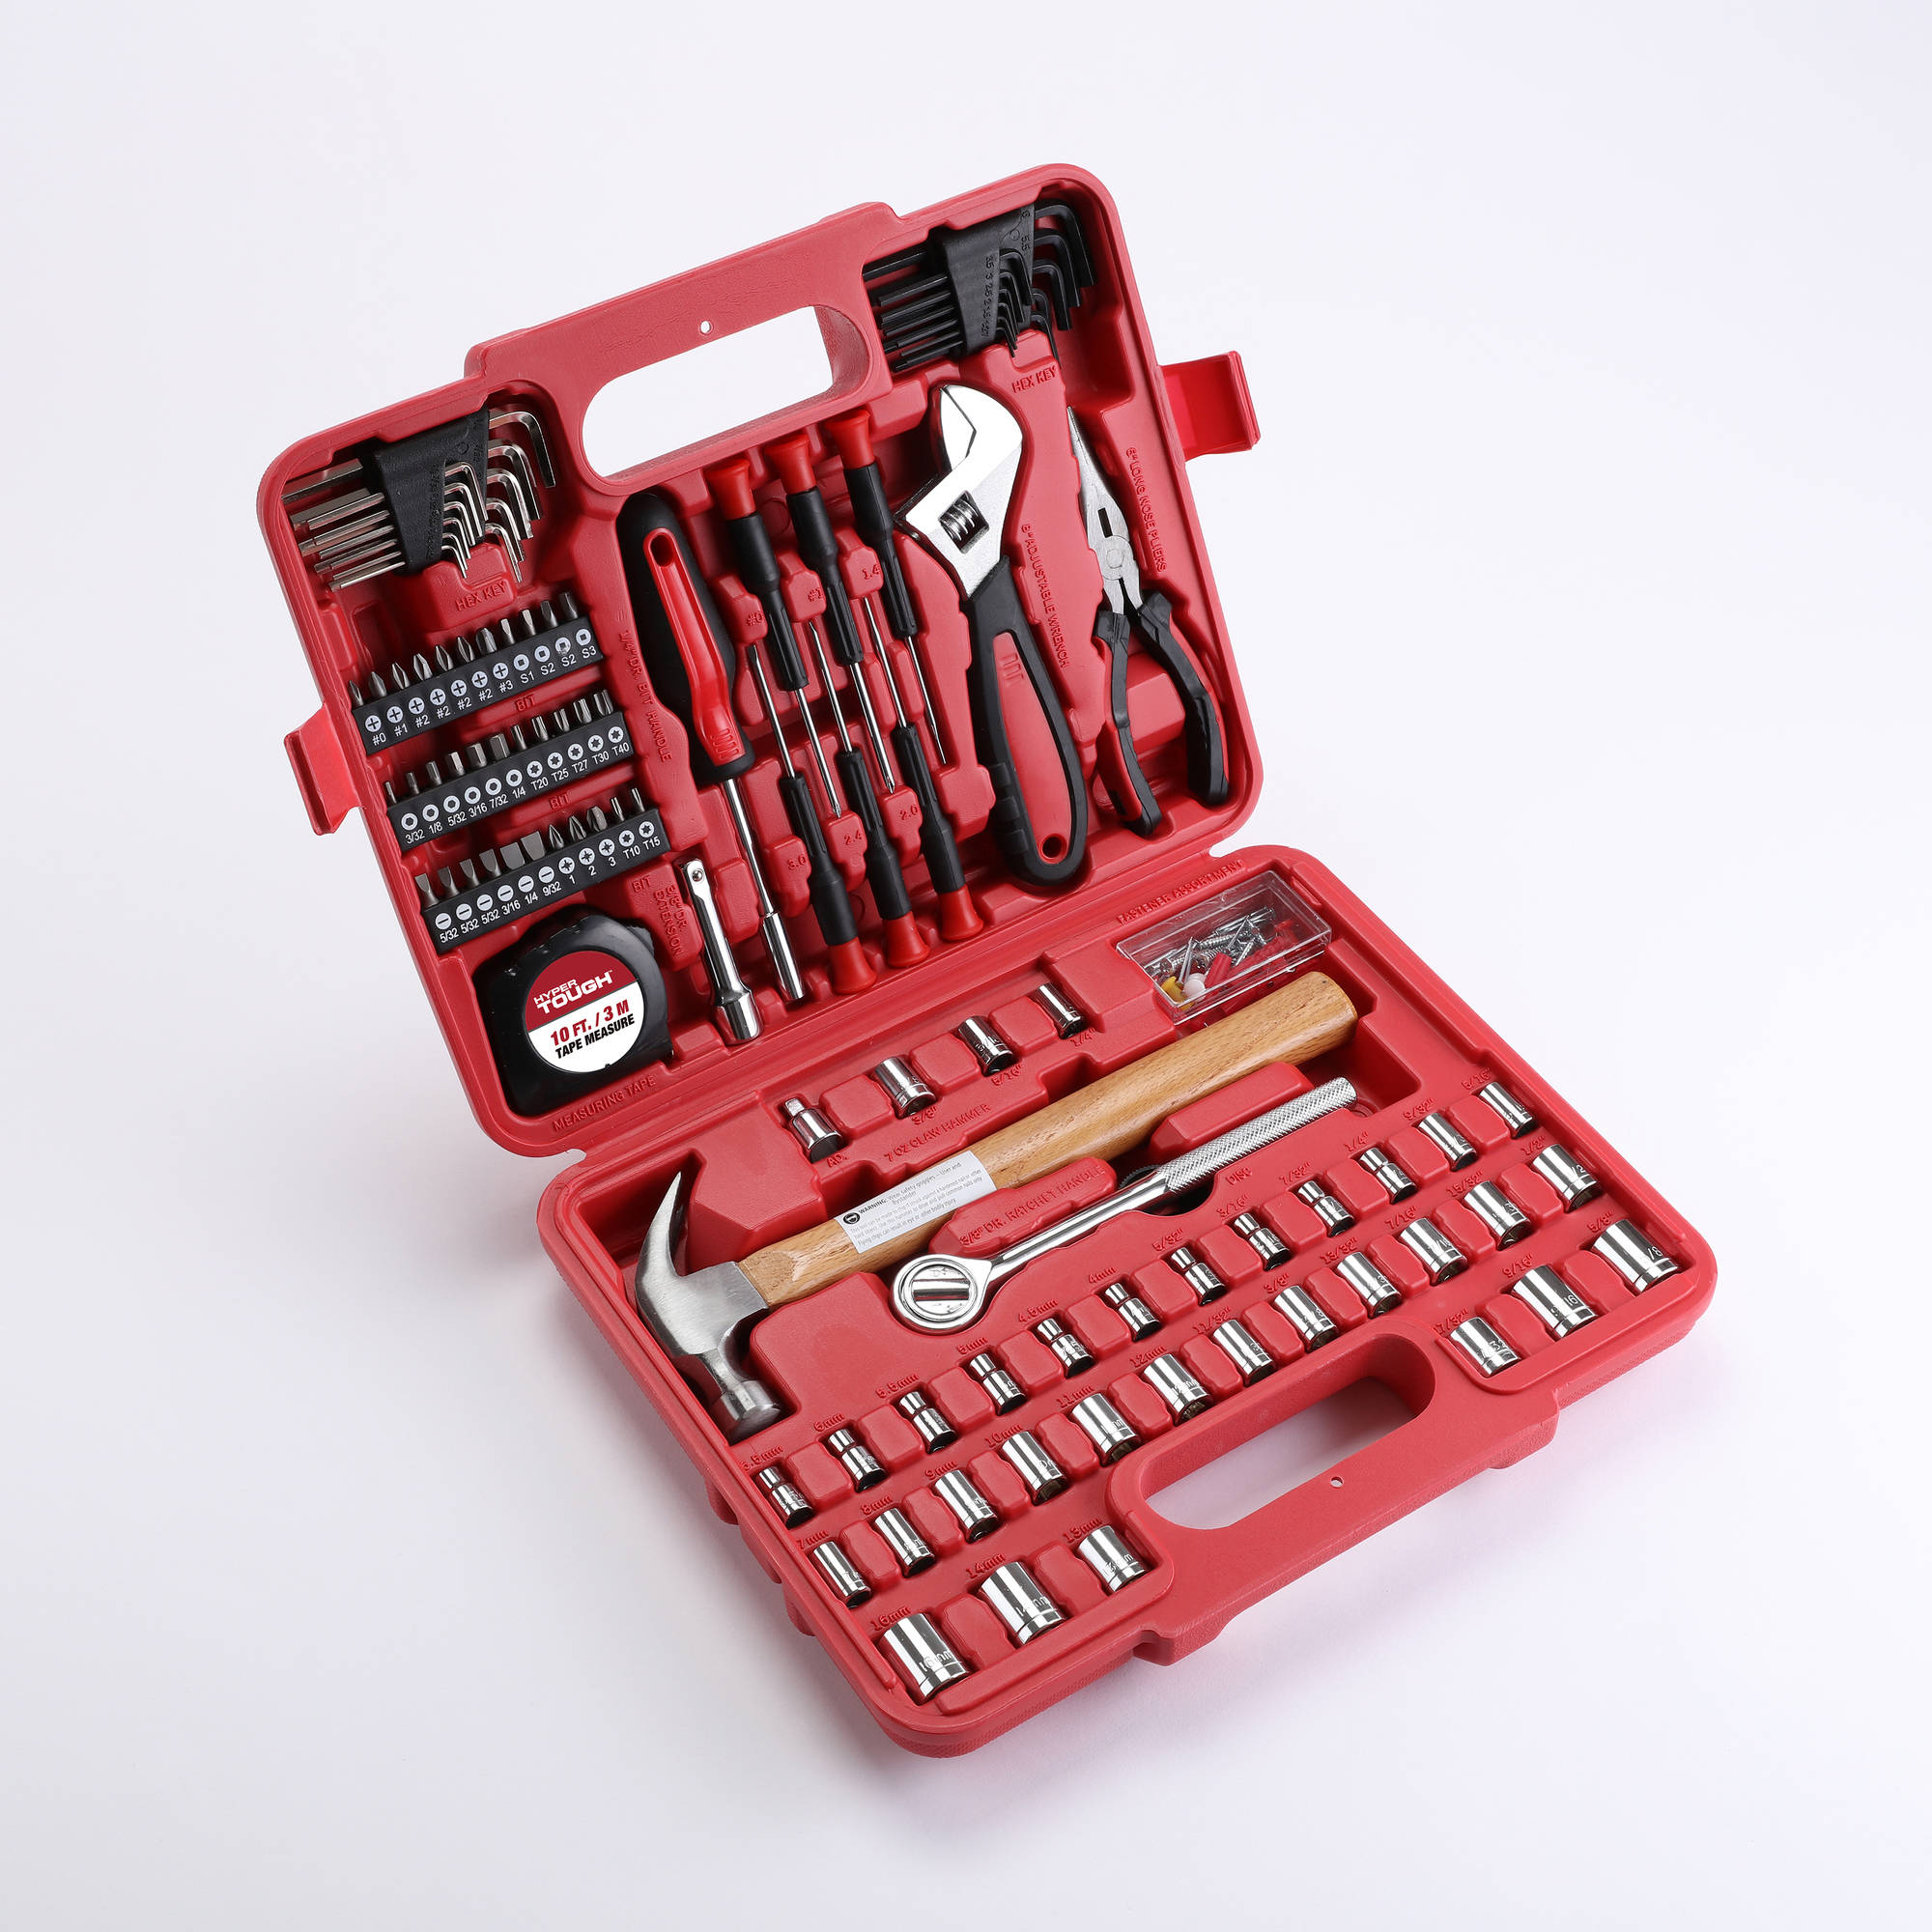 Hyper Tough 110-Piece Home Repair Tool Set With Case - image 1 of 6